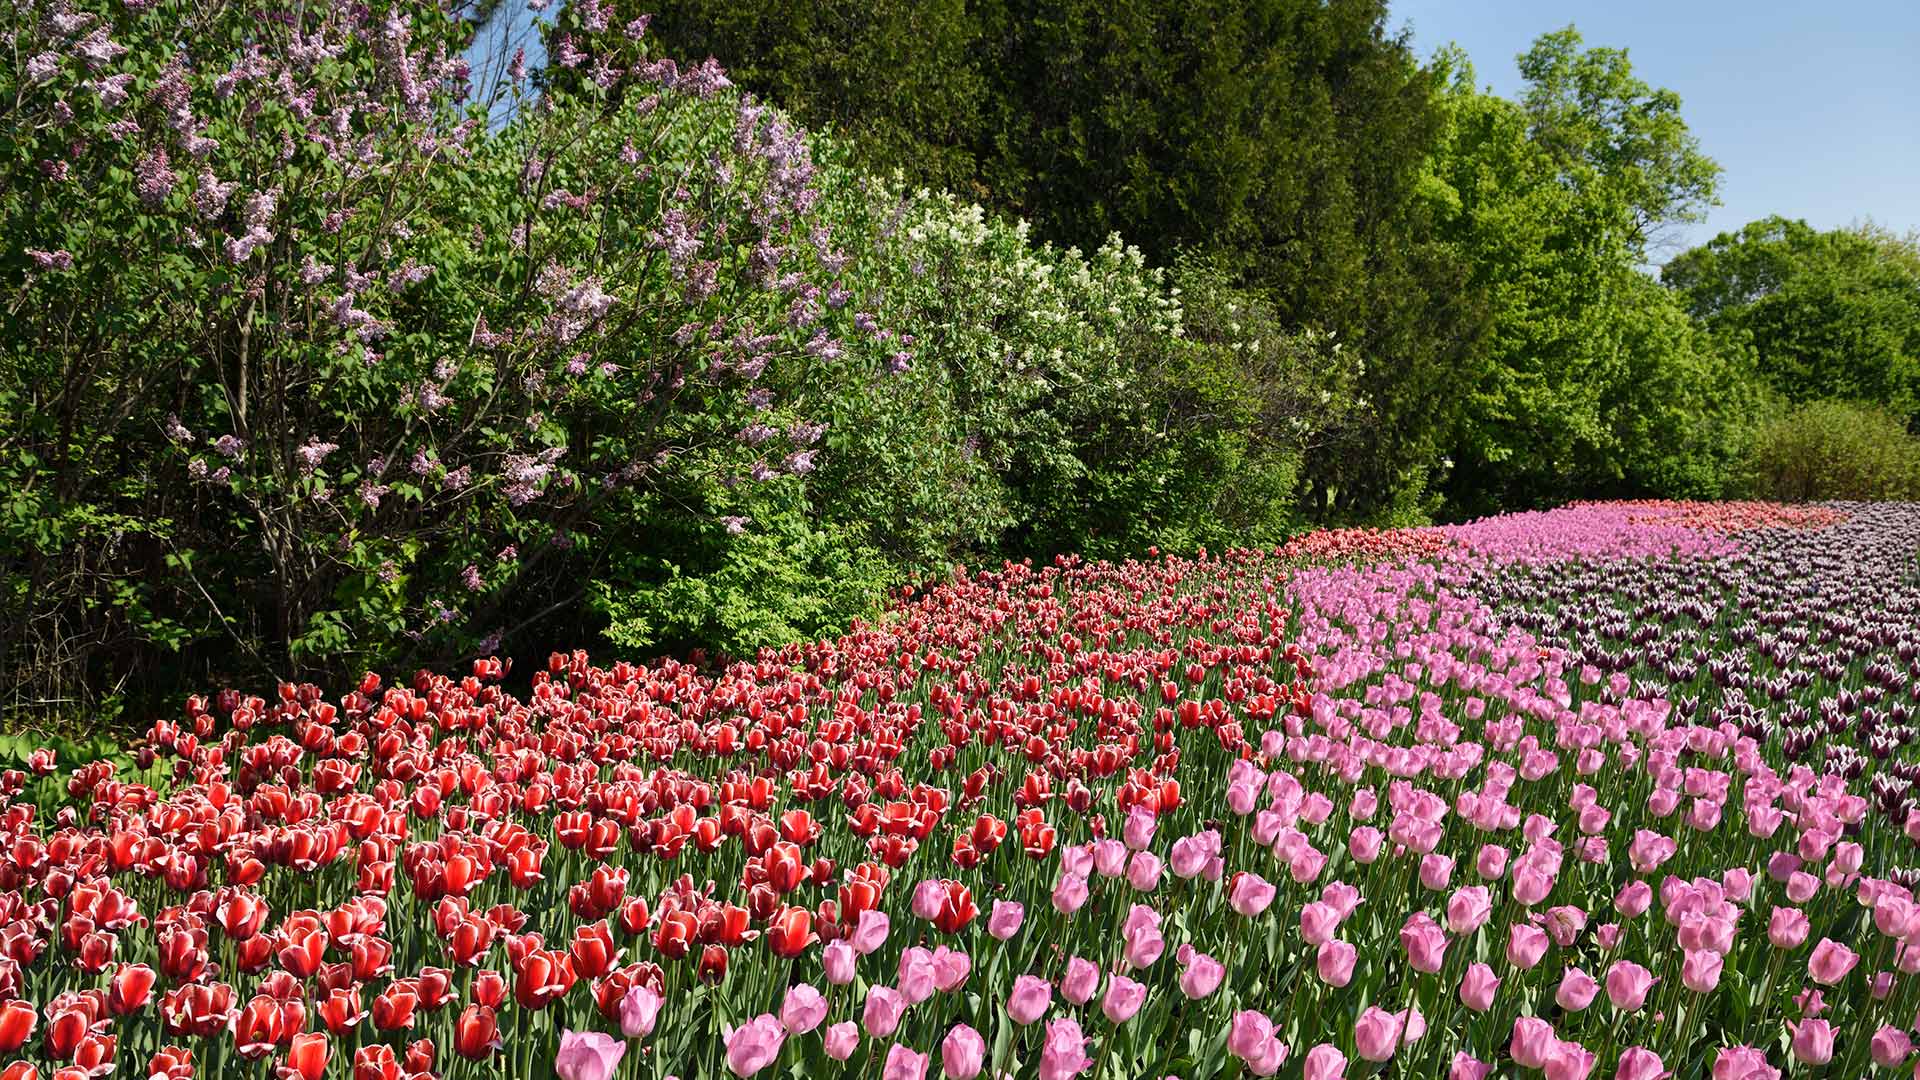 Blossoming red and pink tulips in Commissioners Park